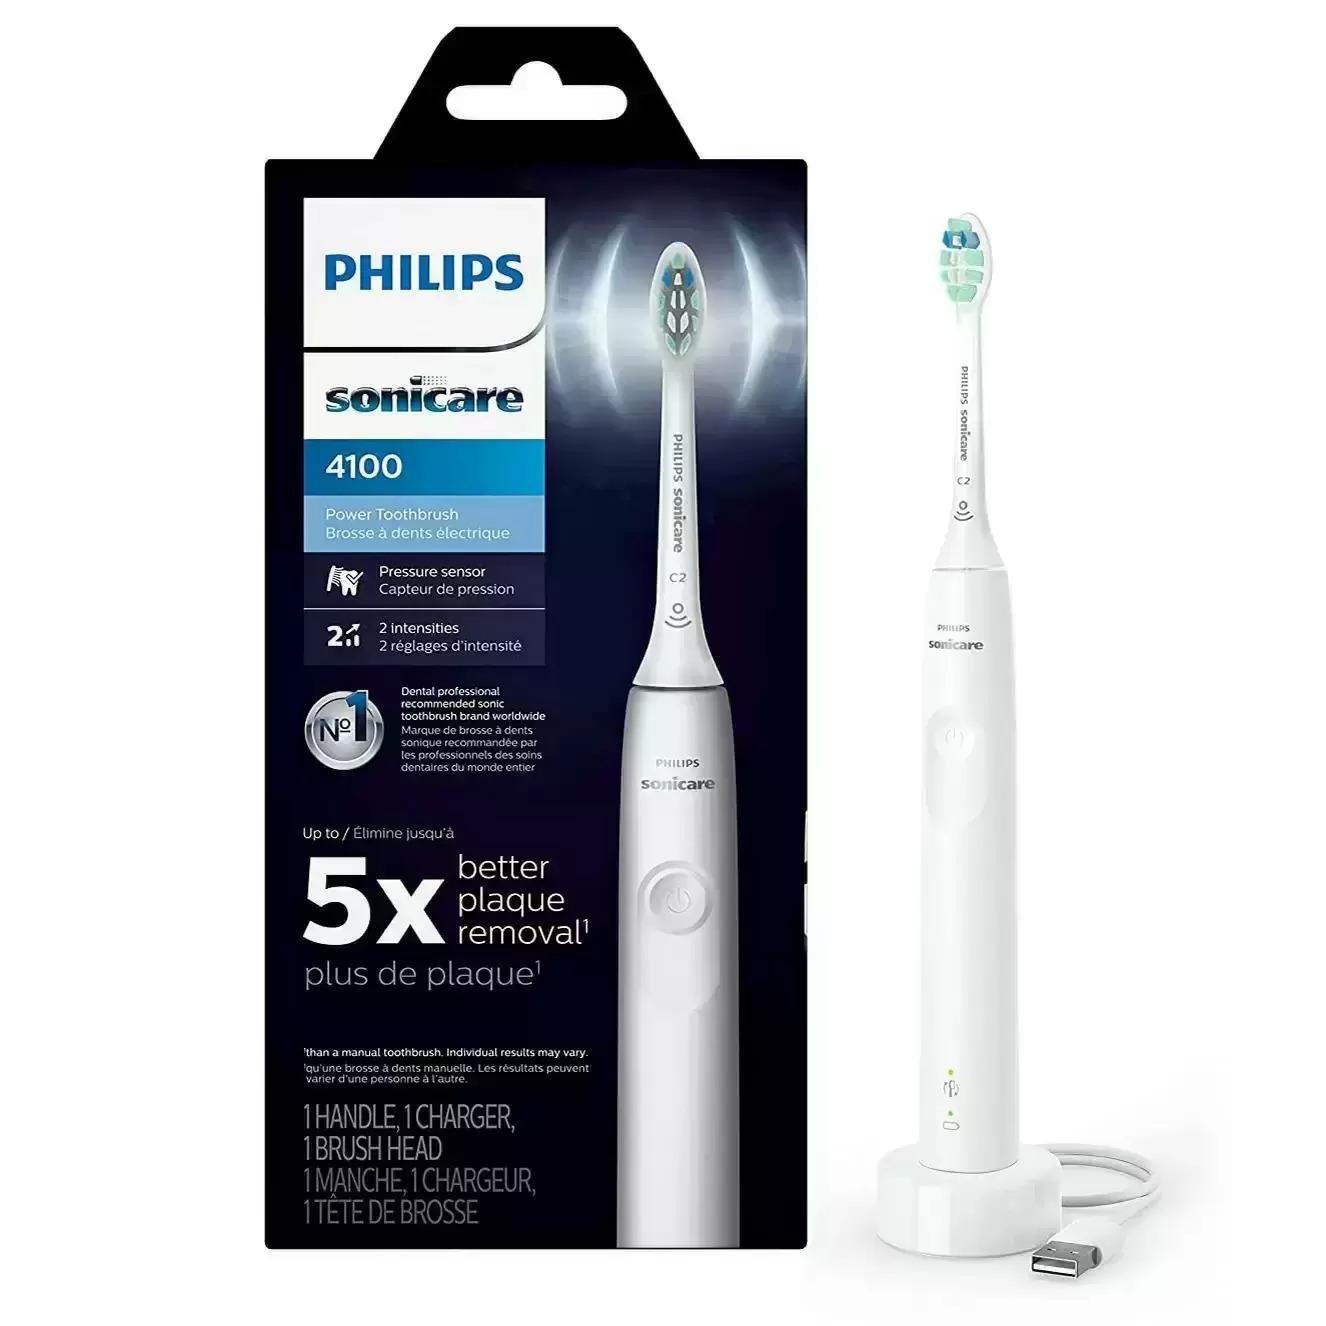 Philips Sonicare 4100 Power Toothbrush Rechargeable Electric Toothbrush for $27.99